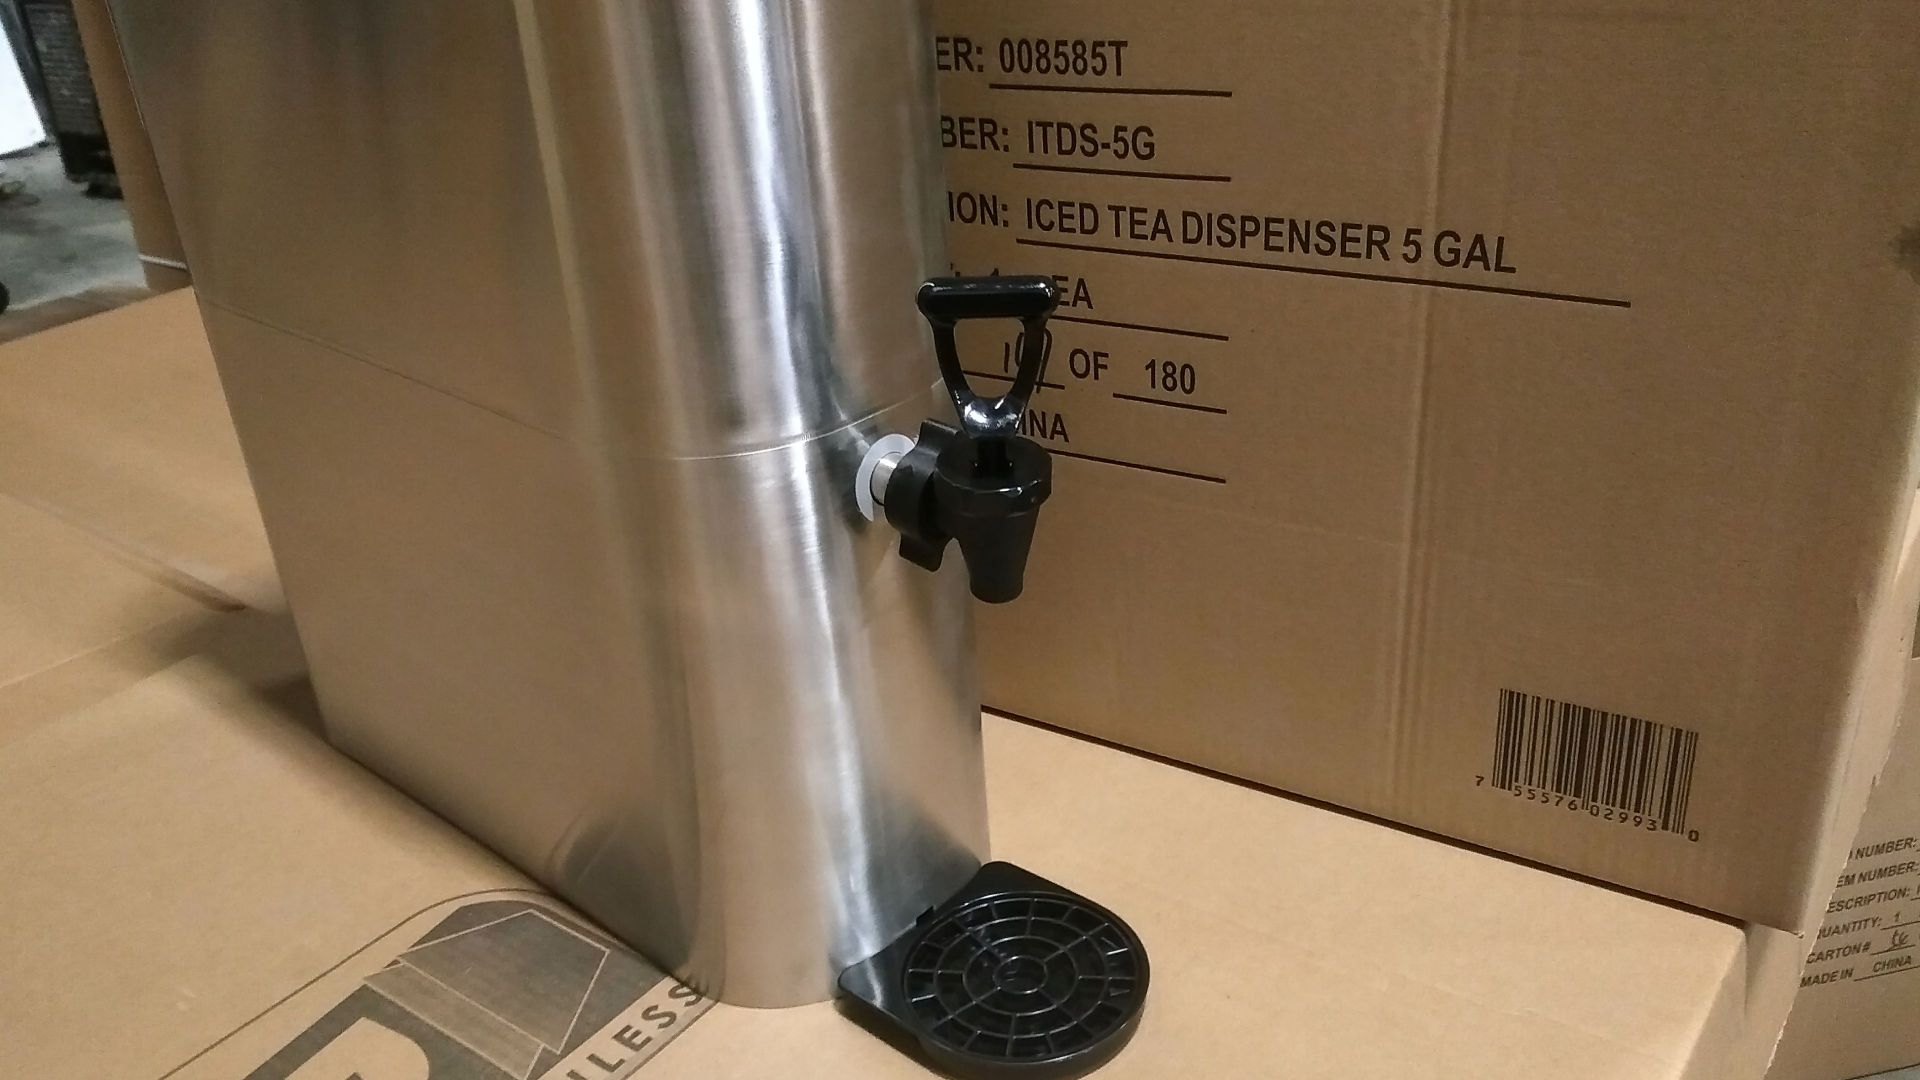 Stainless 5 Gallon Beverage Dispenser Update ITDS-5G - Image 2 of 5